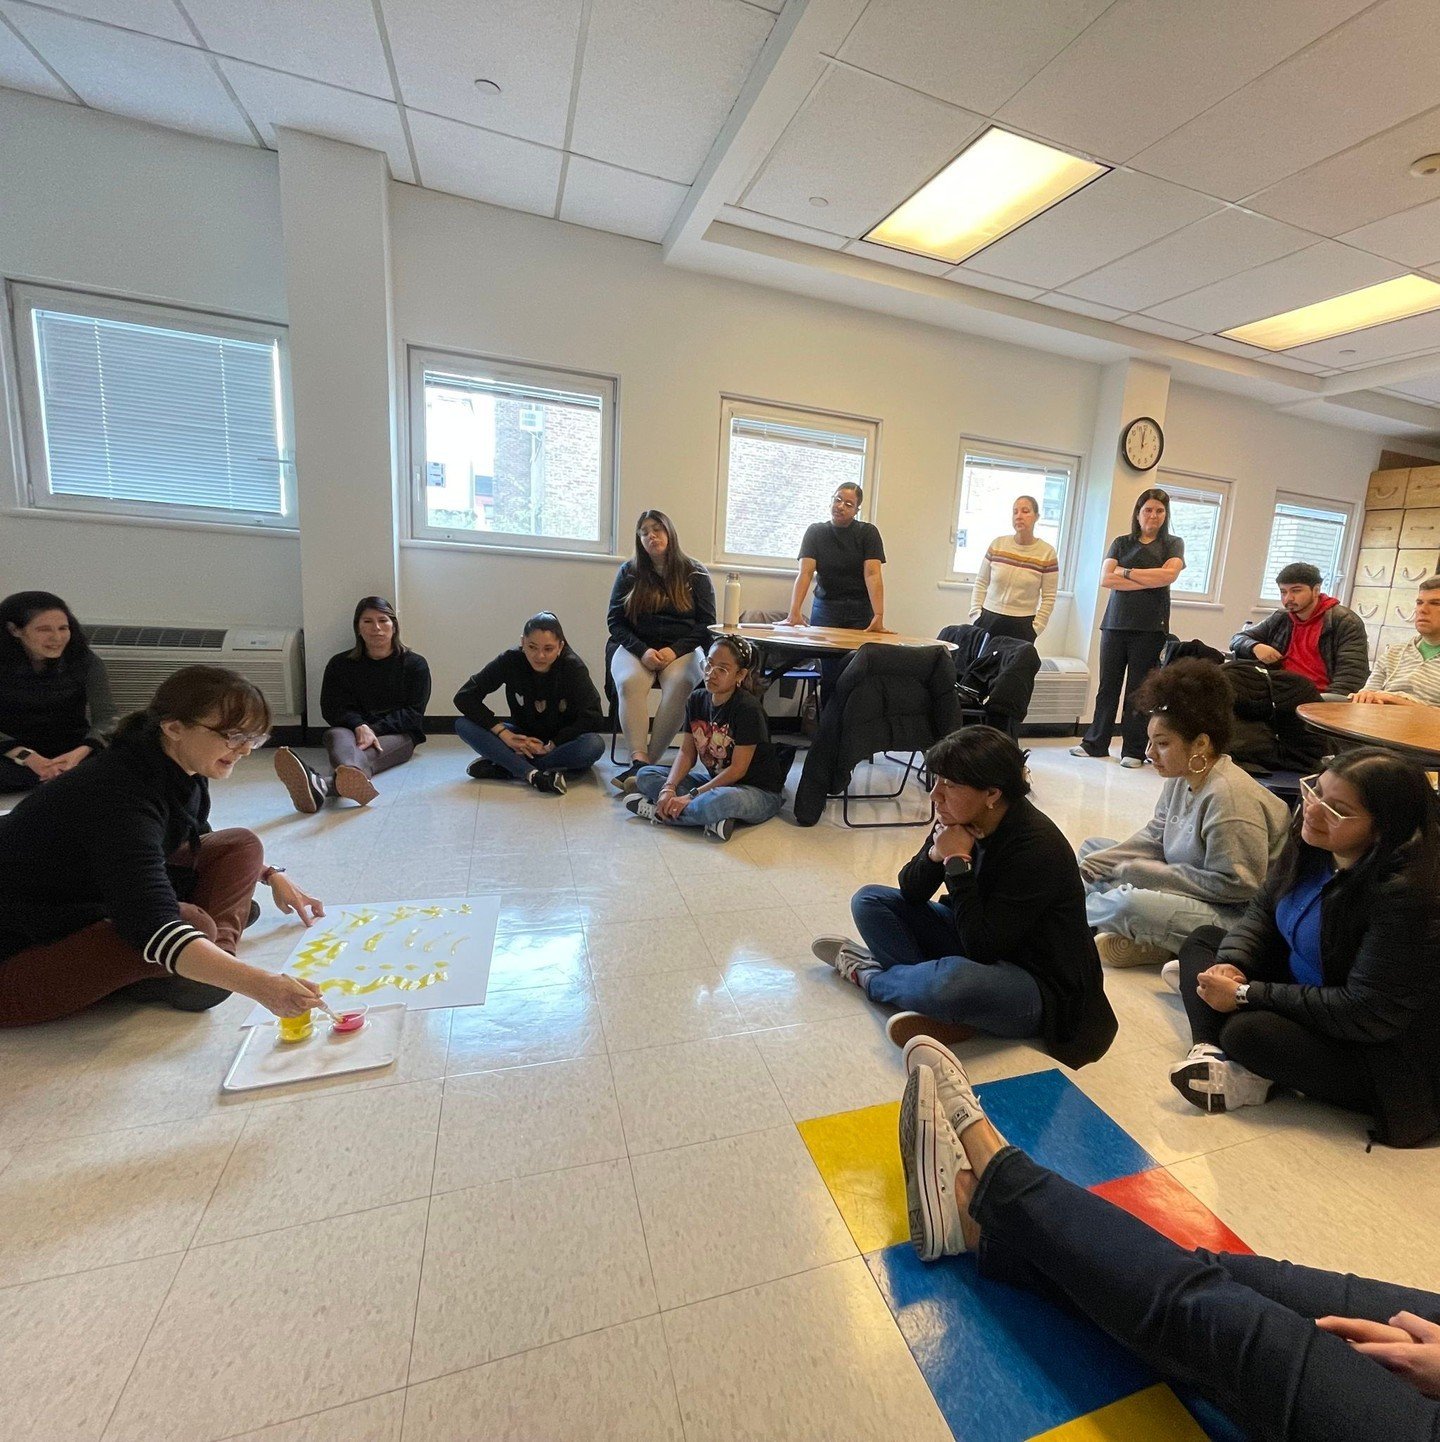 Last month, staff from our Early Intervention programs went to Cassidy&rsquo;s Place to explain a new art-based curriculum to the teachers. They explained simple ways to present materials and paint, which allows for open-ended independent exploration